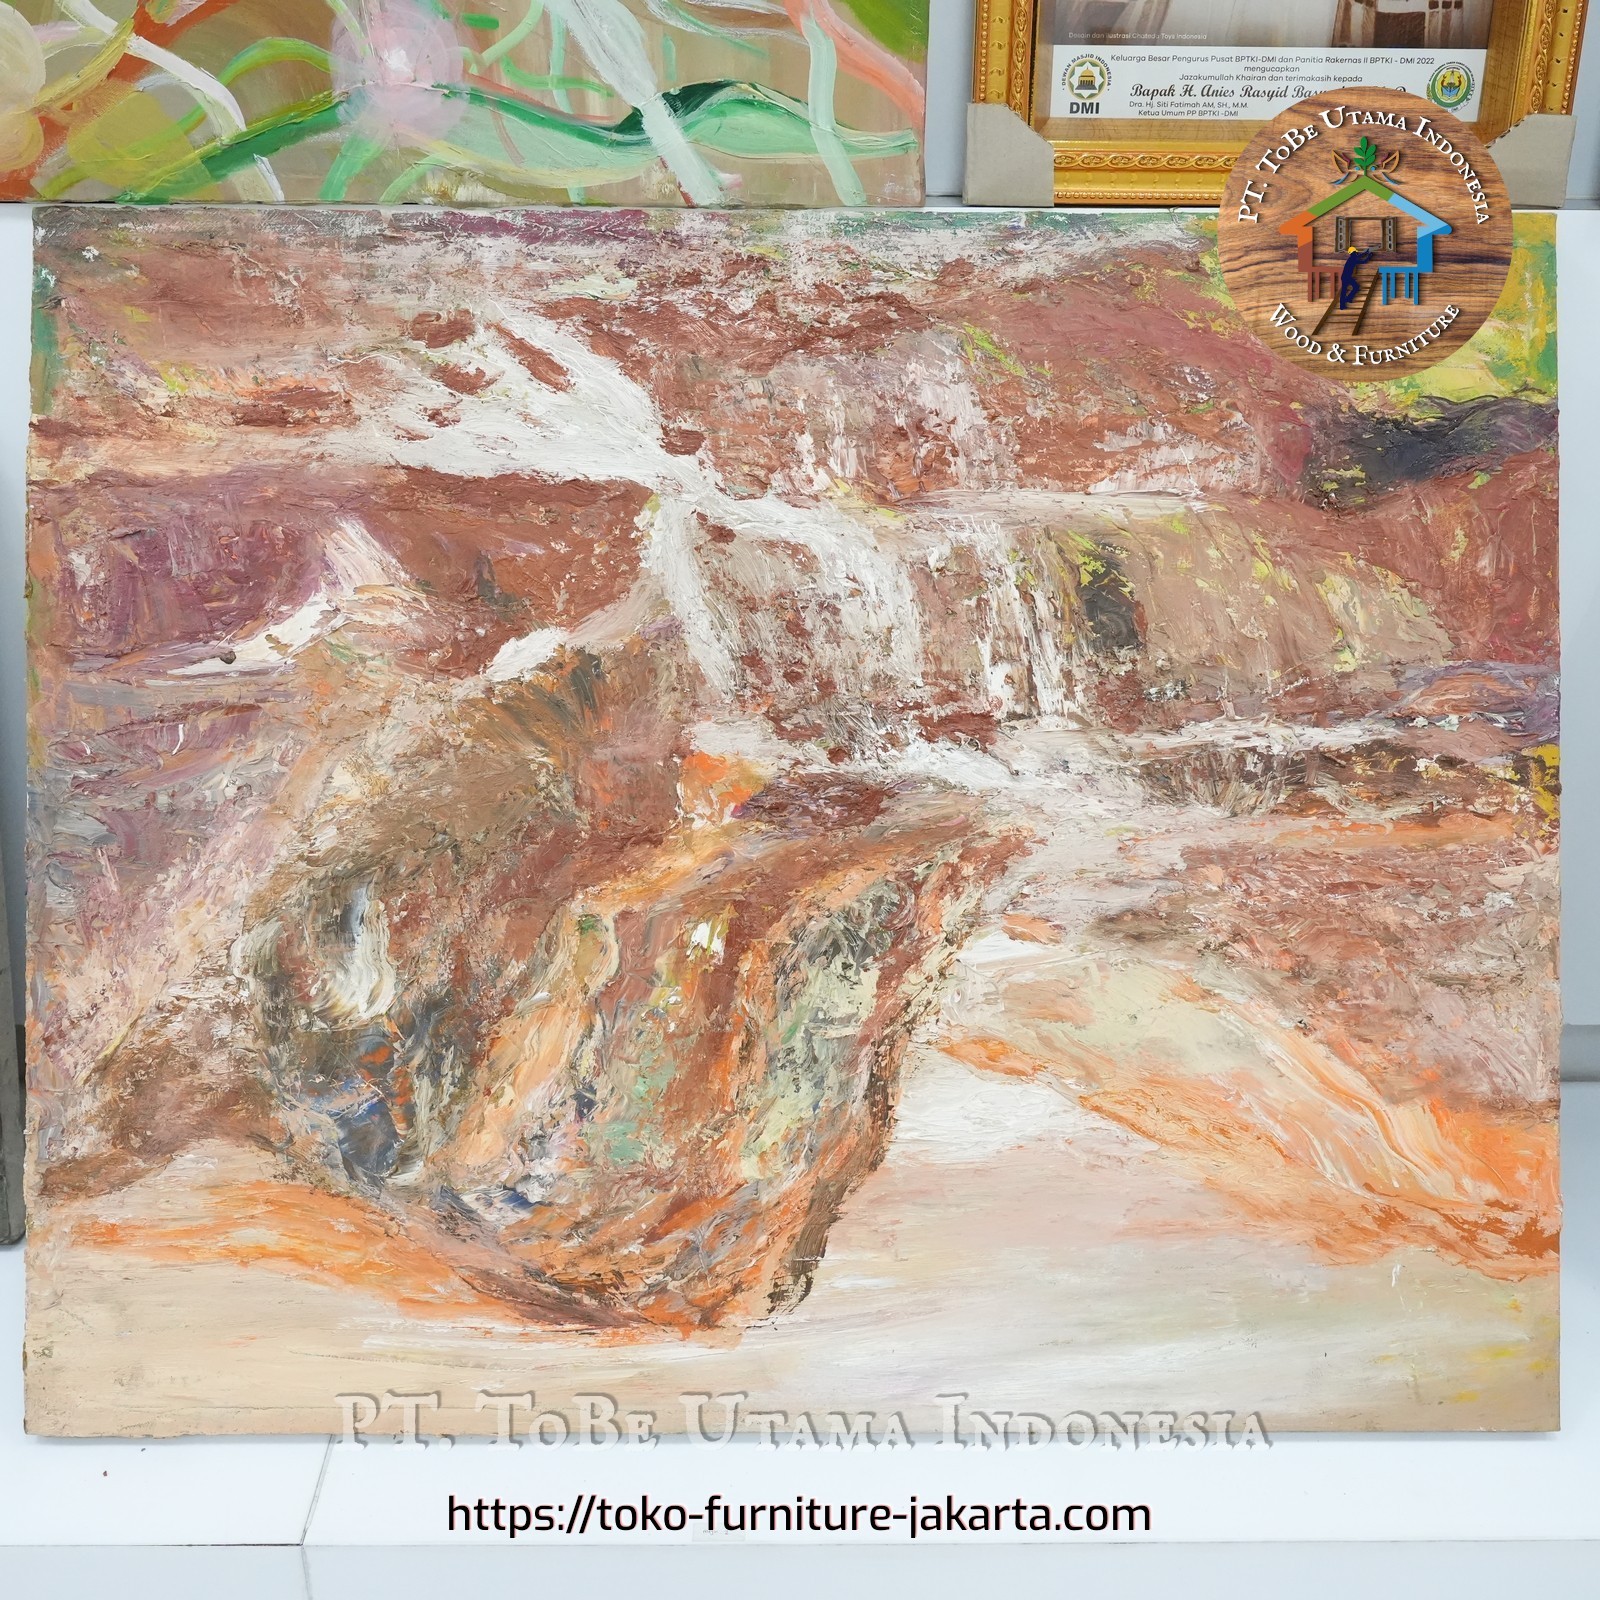 Accessories: Painting of Flowing Water in Dugout (image 1 of 3).